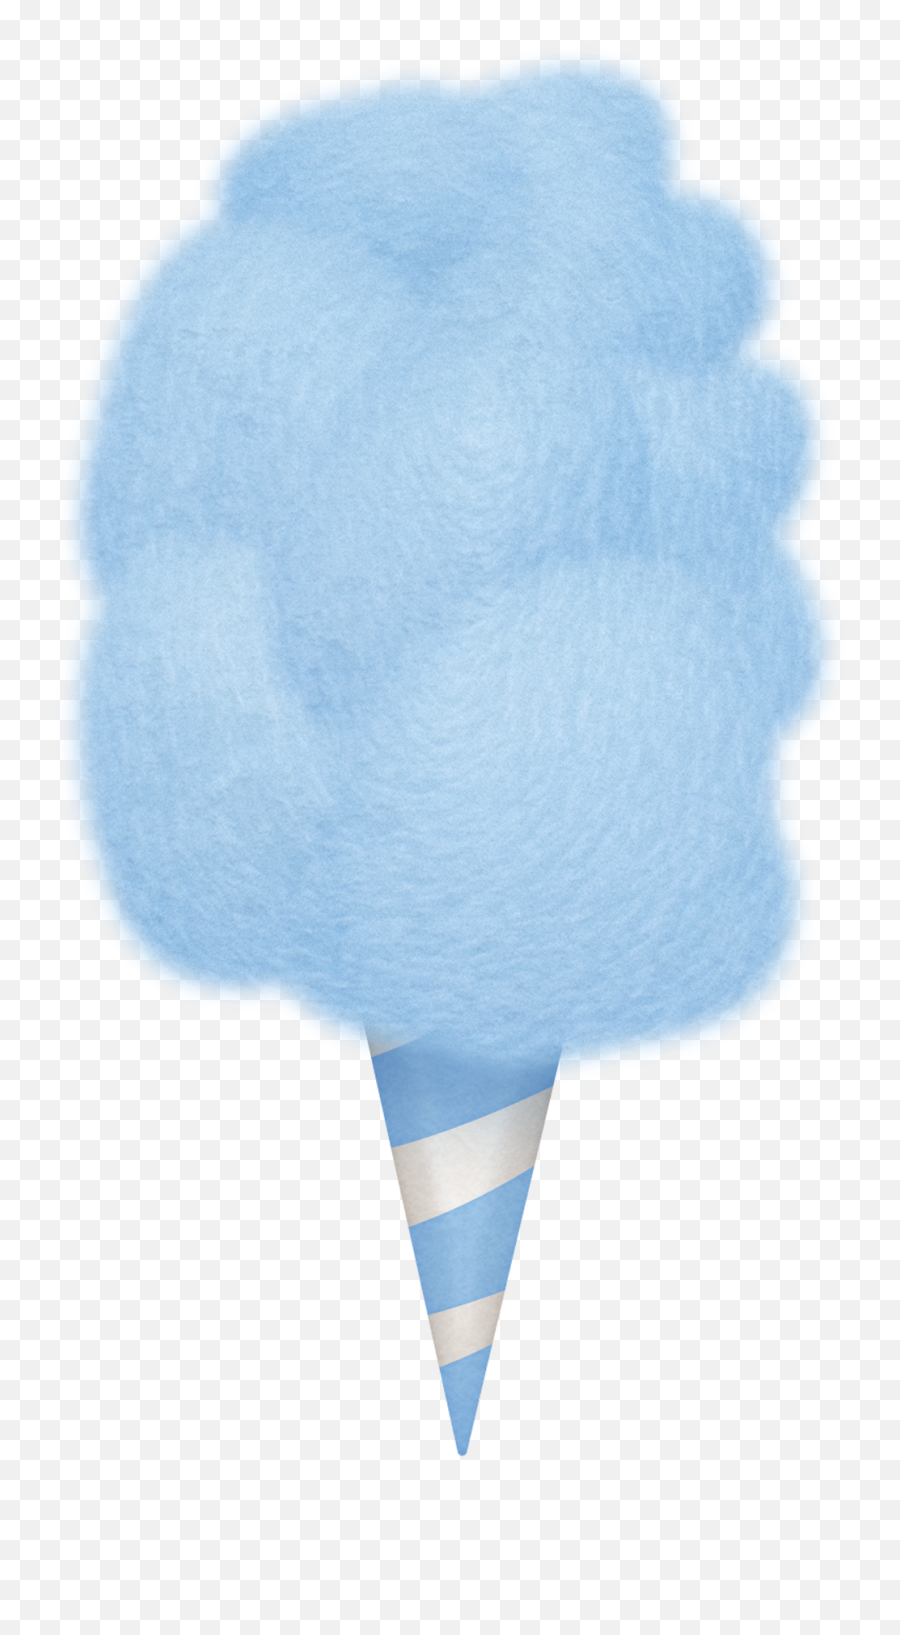 Cotton Candy Png Background Image - Blue Cotton Candy Png,Cotton Candy Transparent